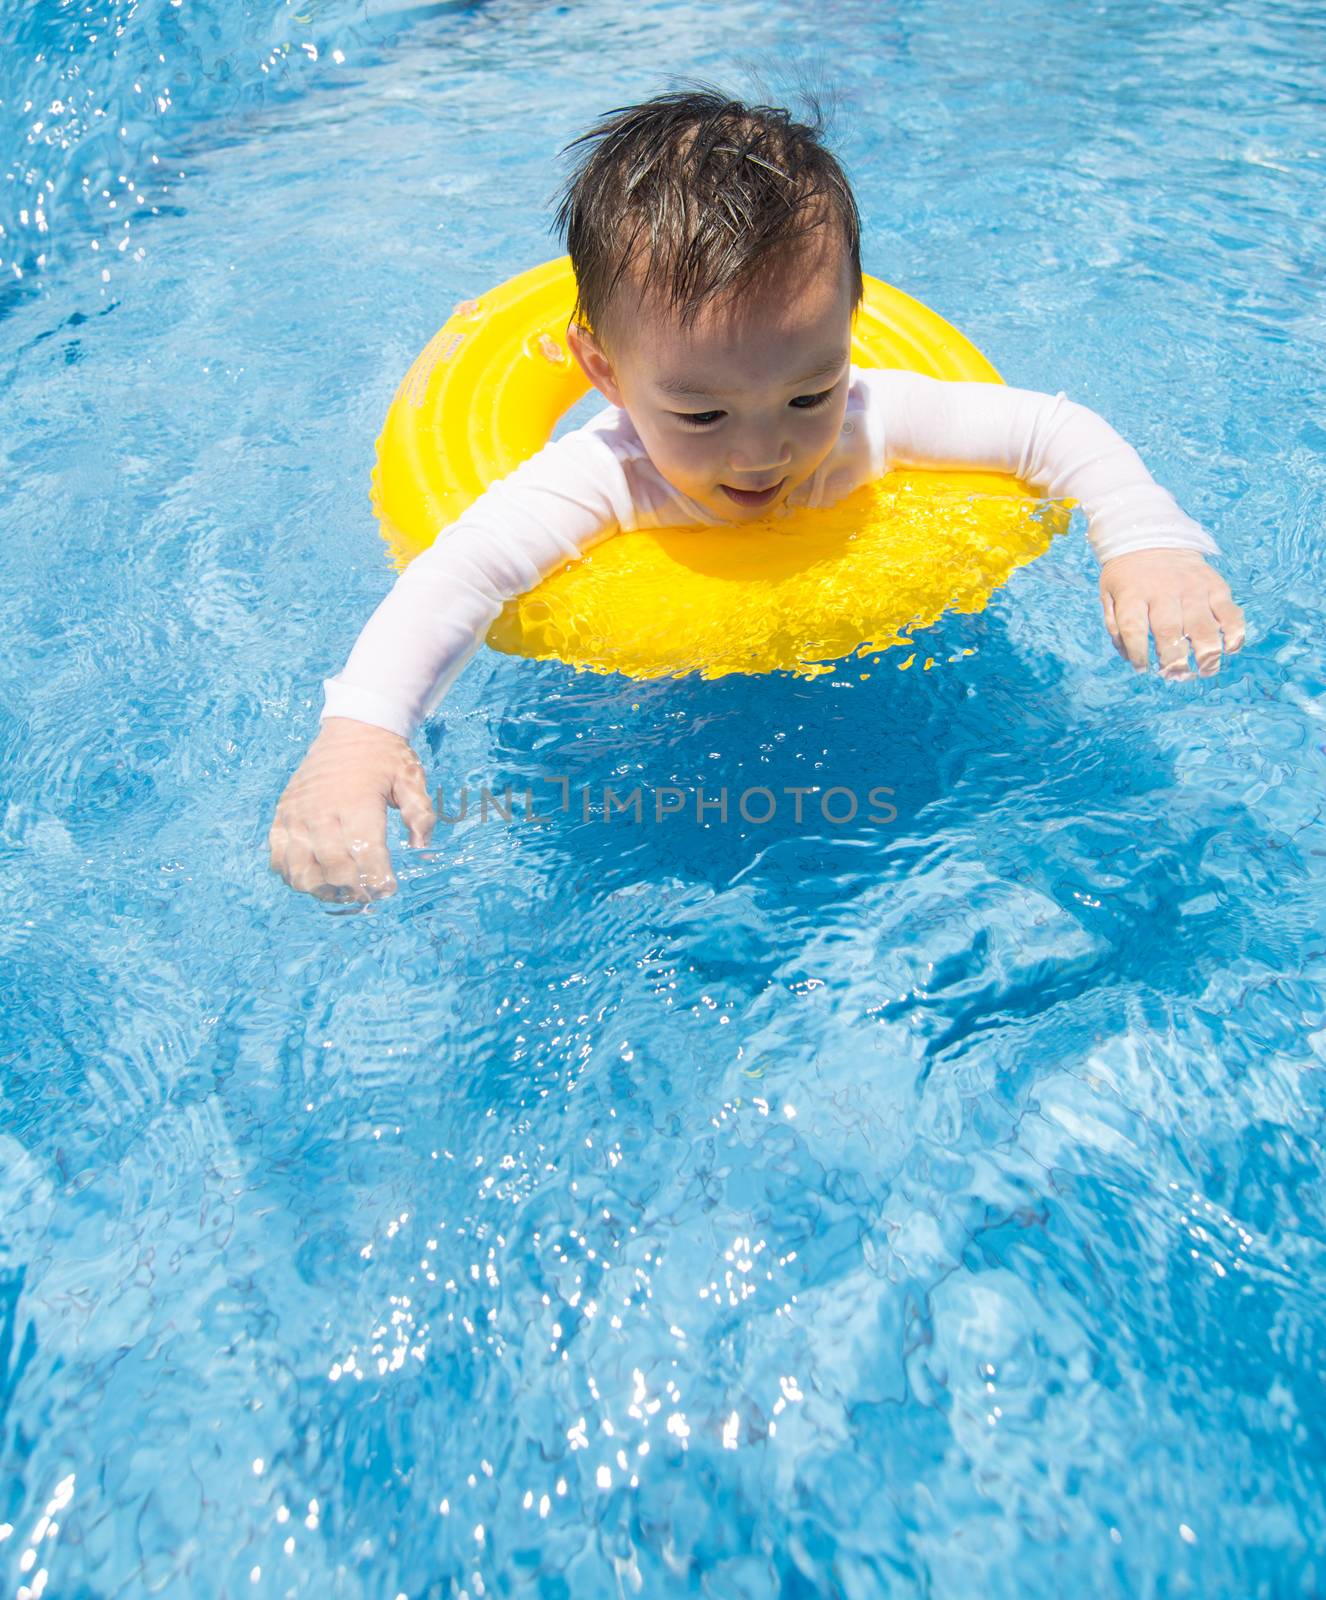 baby boy Activities on the pool, children swimming by heinteh